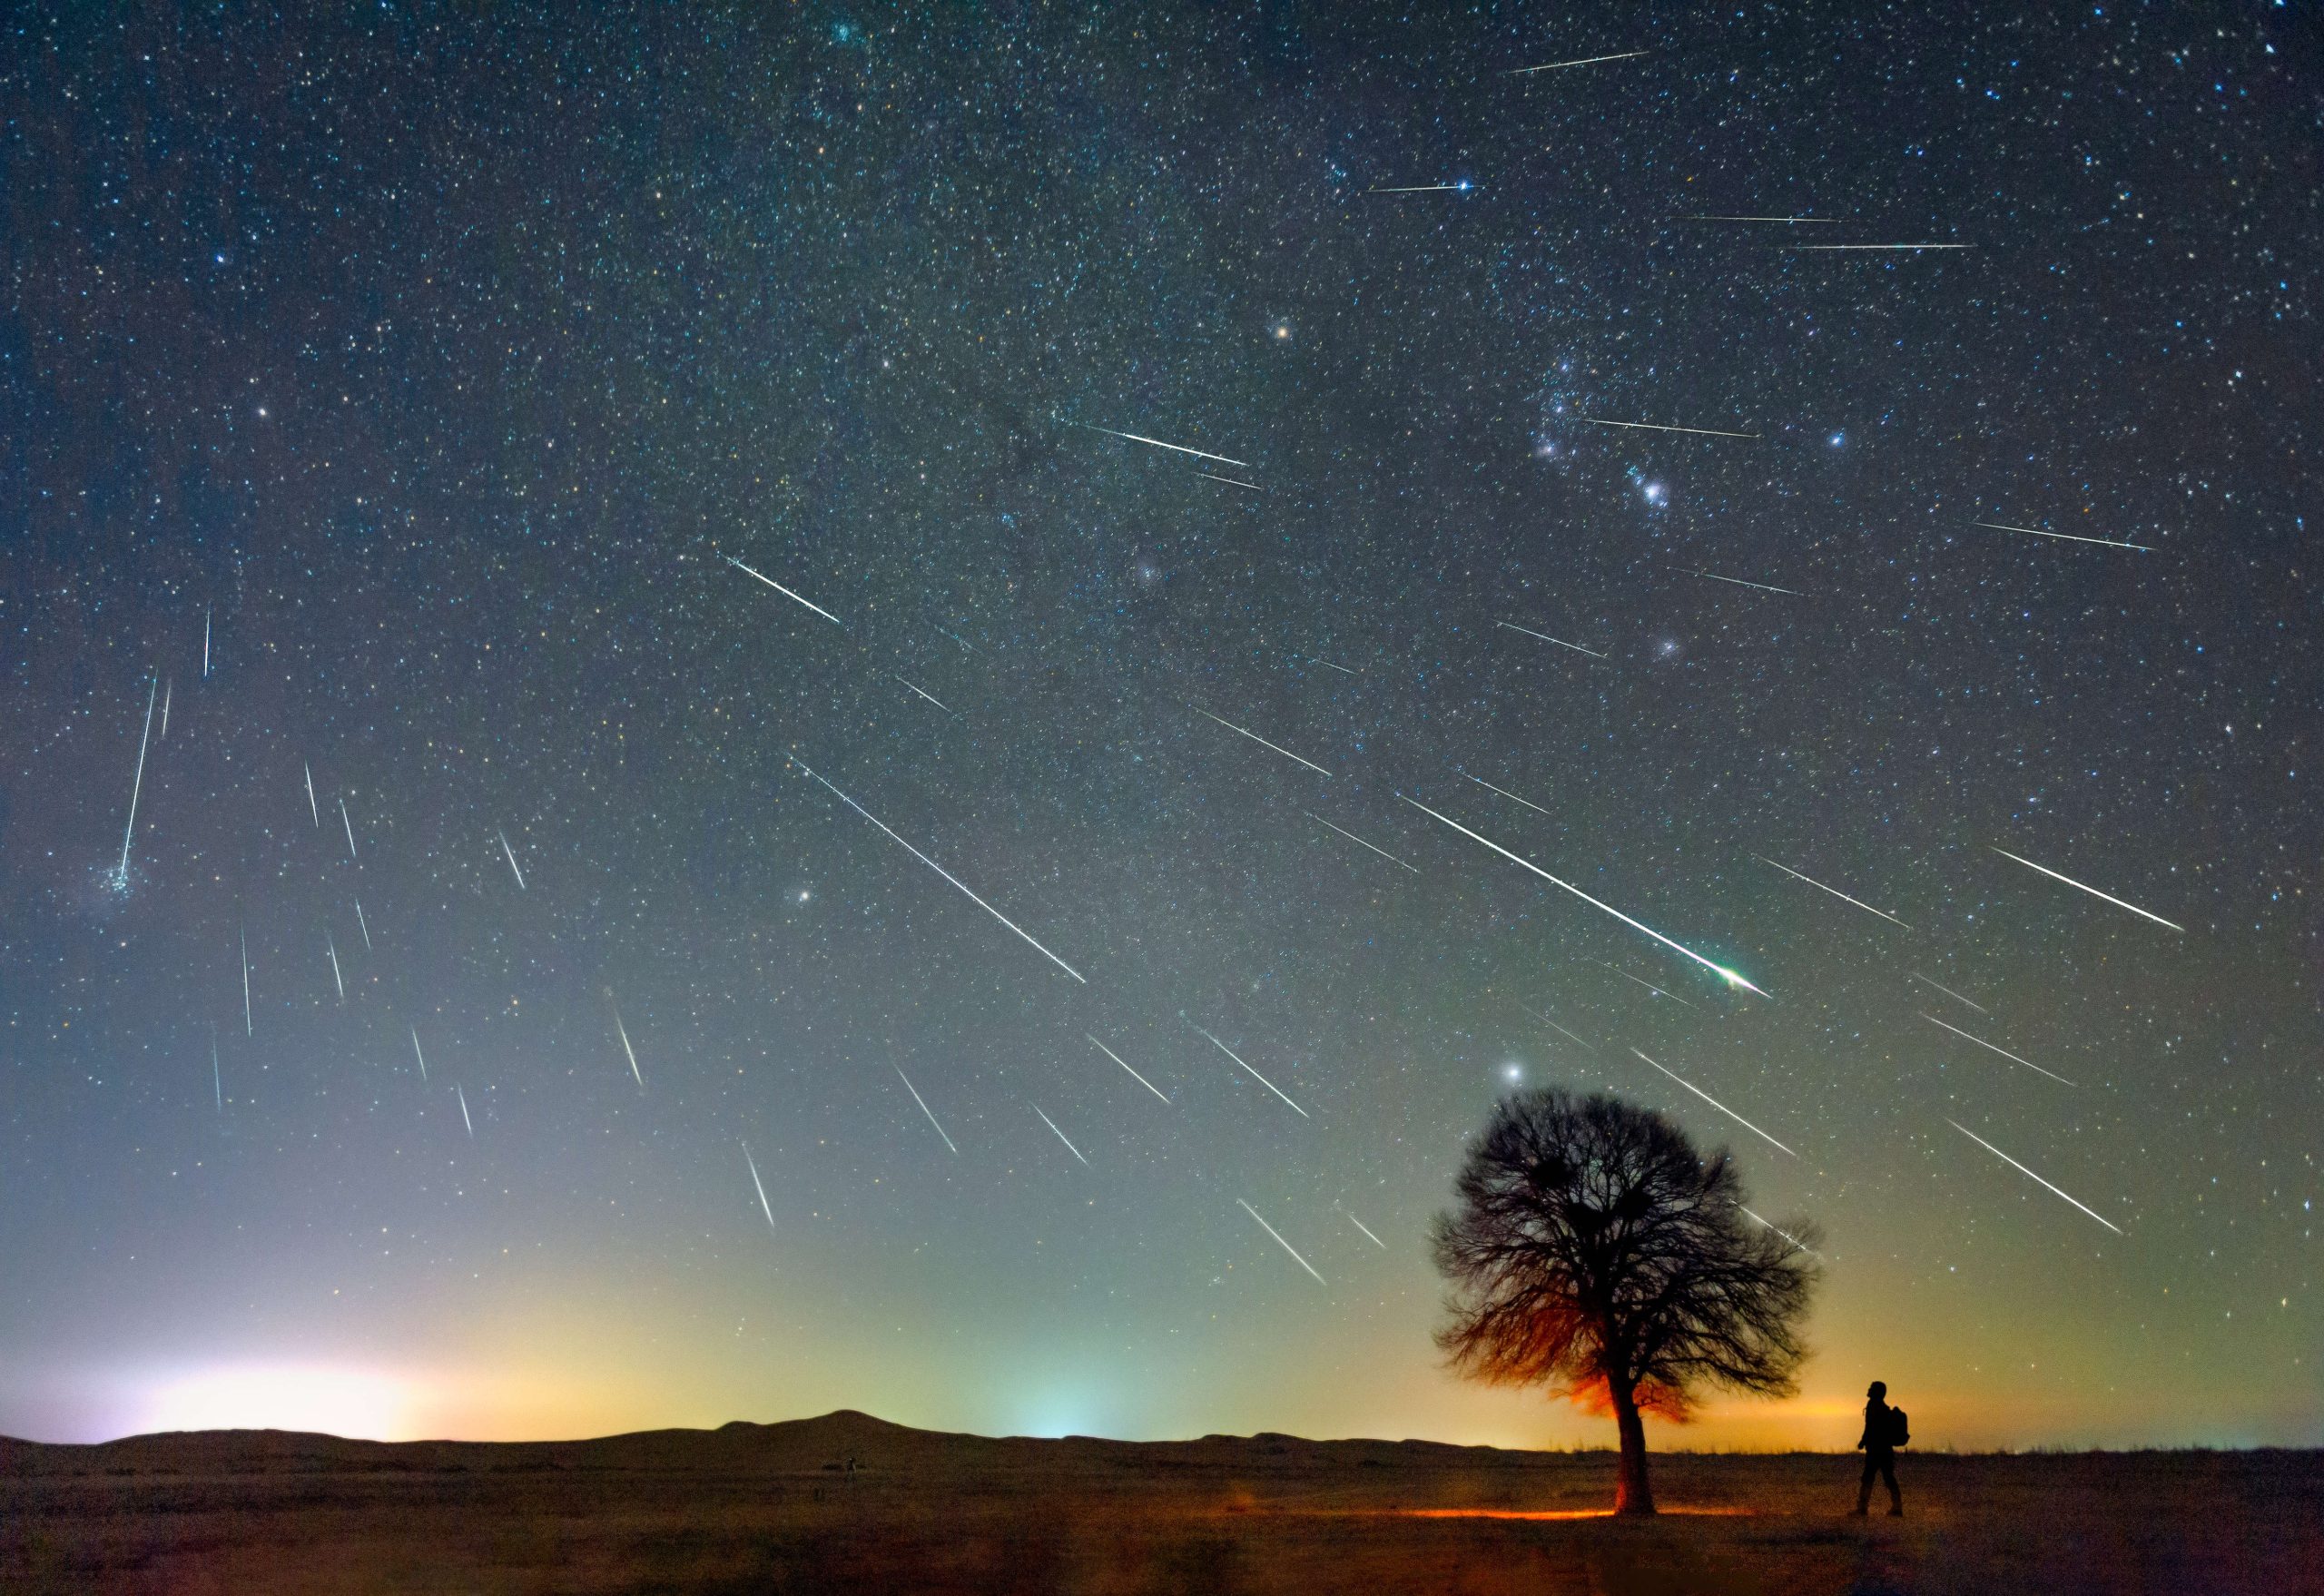 Here are things you should know about the Geminids meteor shower from asteroid 3200 Phaethon. (Photo: Syfy)